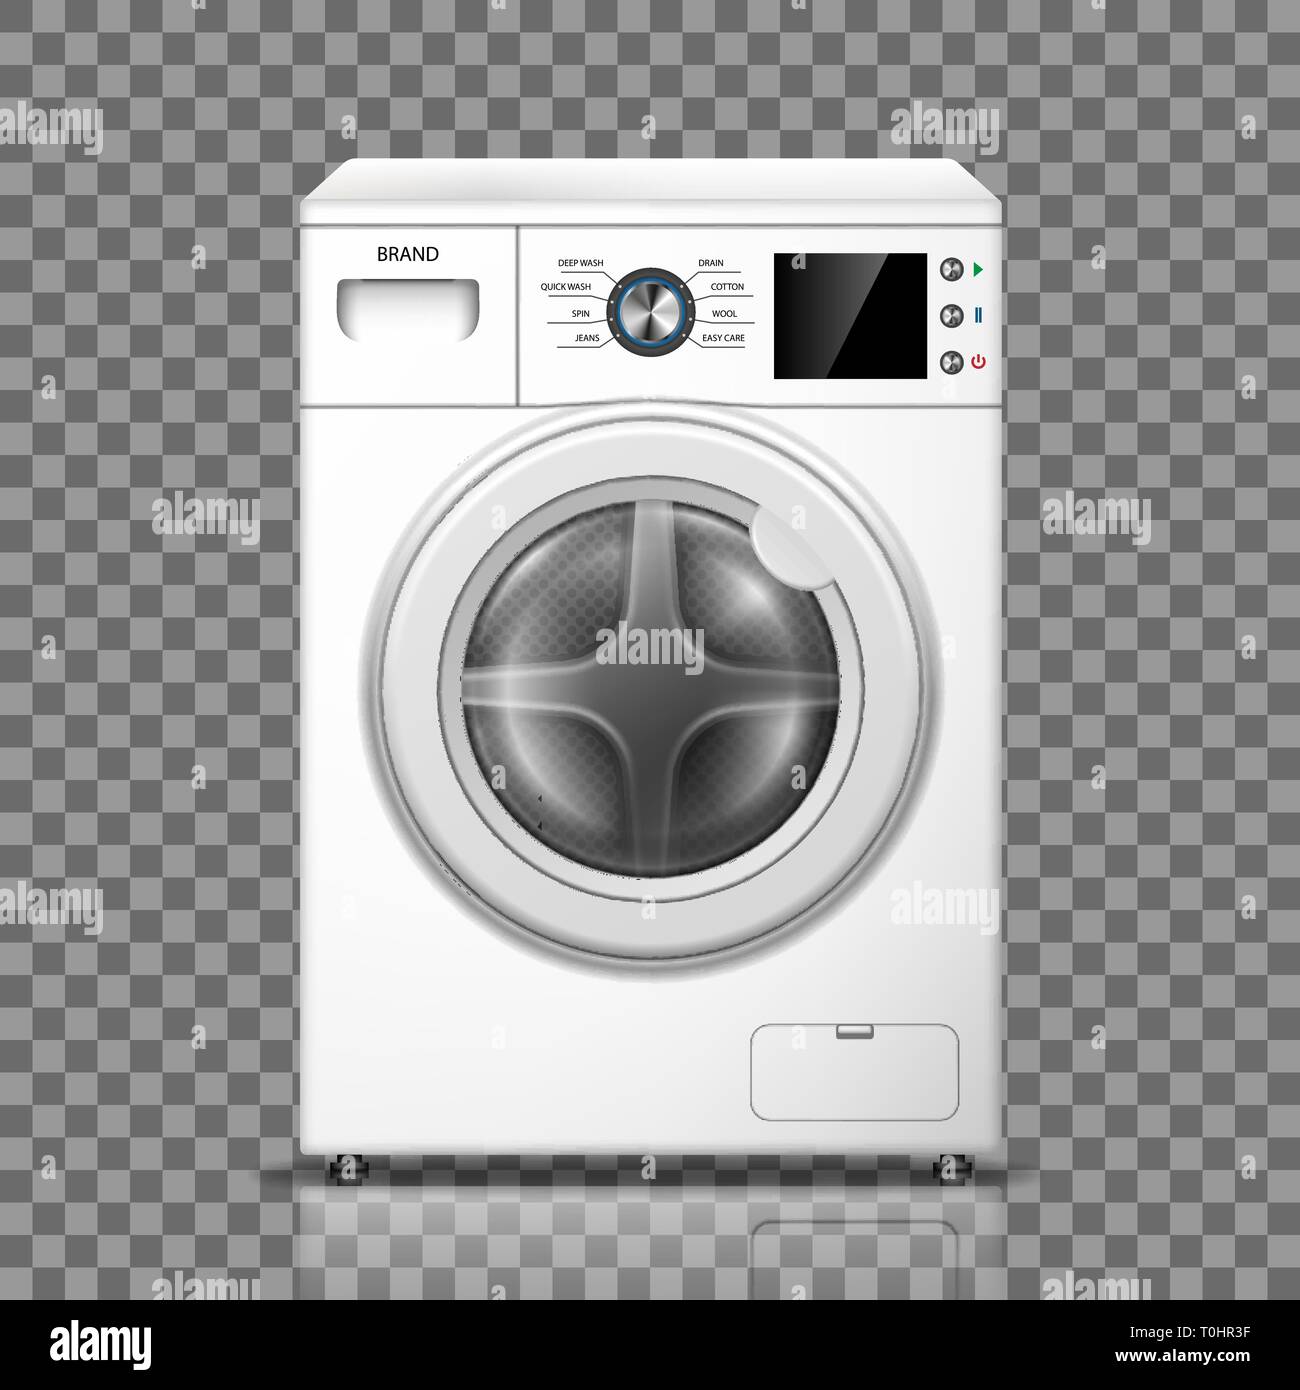 Realistic washing machine isolated on transparent background. White washer front view. Modern washing machine mockup or home appliances. vector Stock Vector